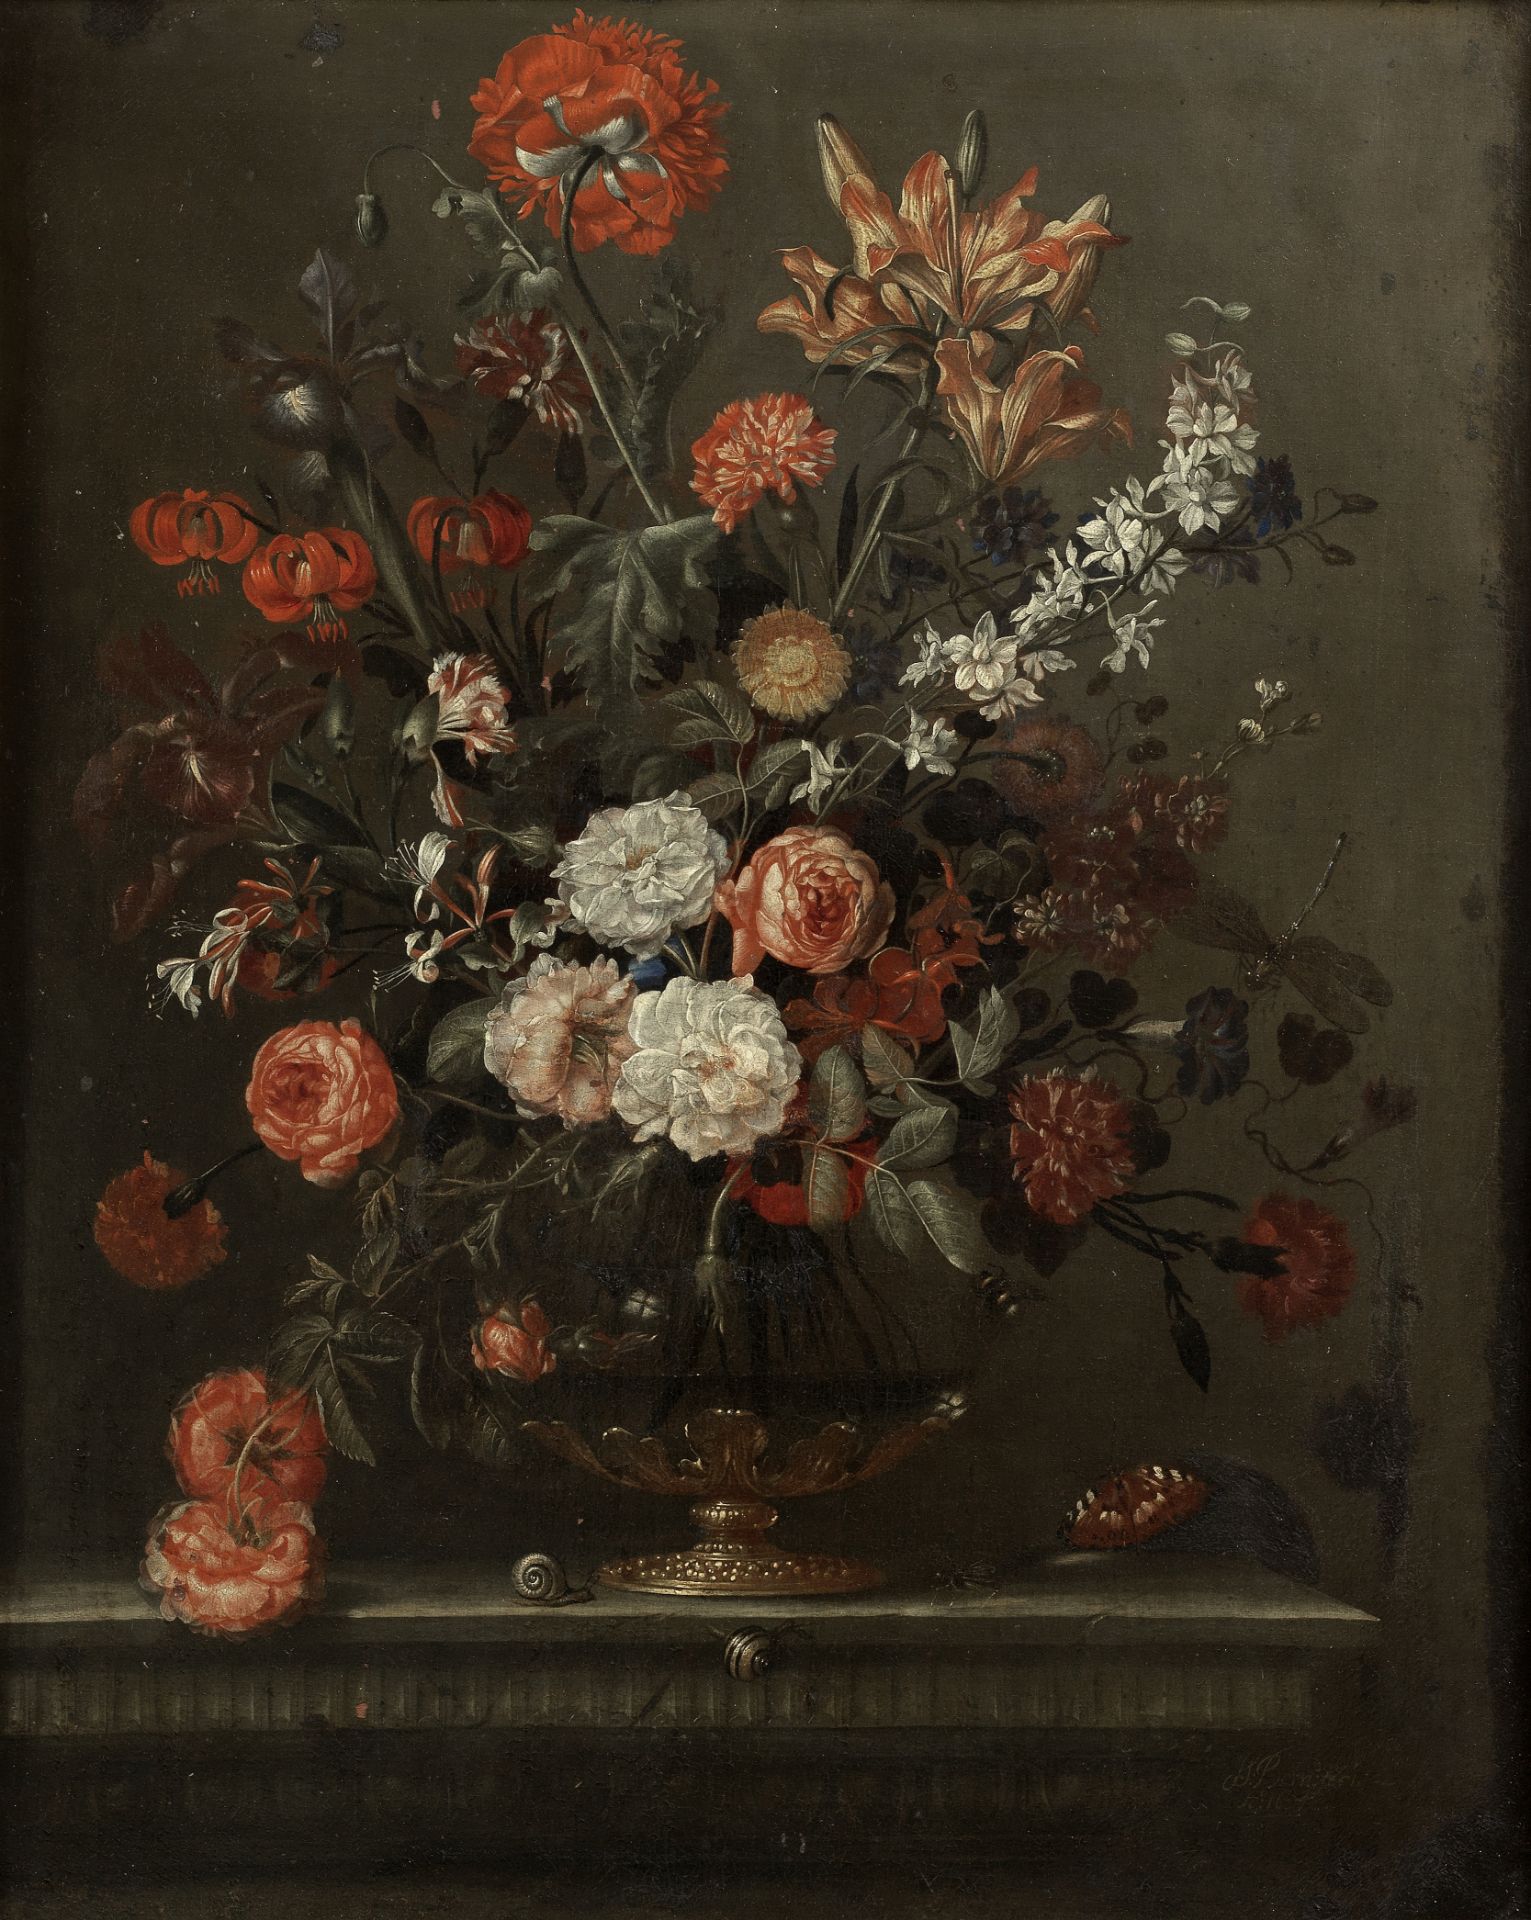 J.S. Bernard (active France, 1657-1667) A still life of roses, carnations, lilies and other flowe...